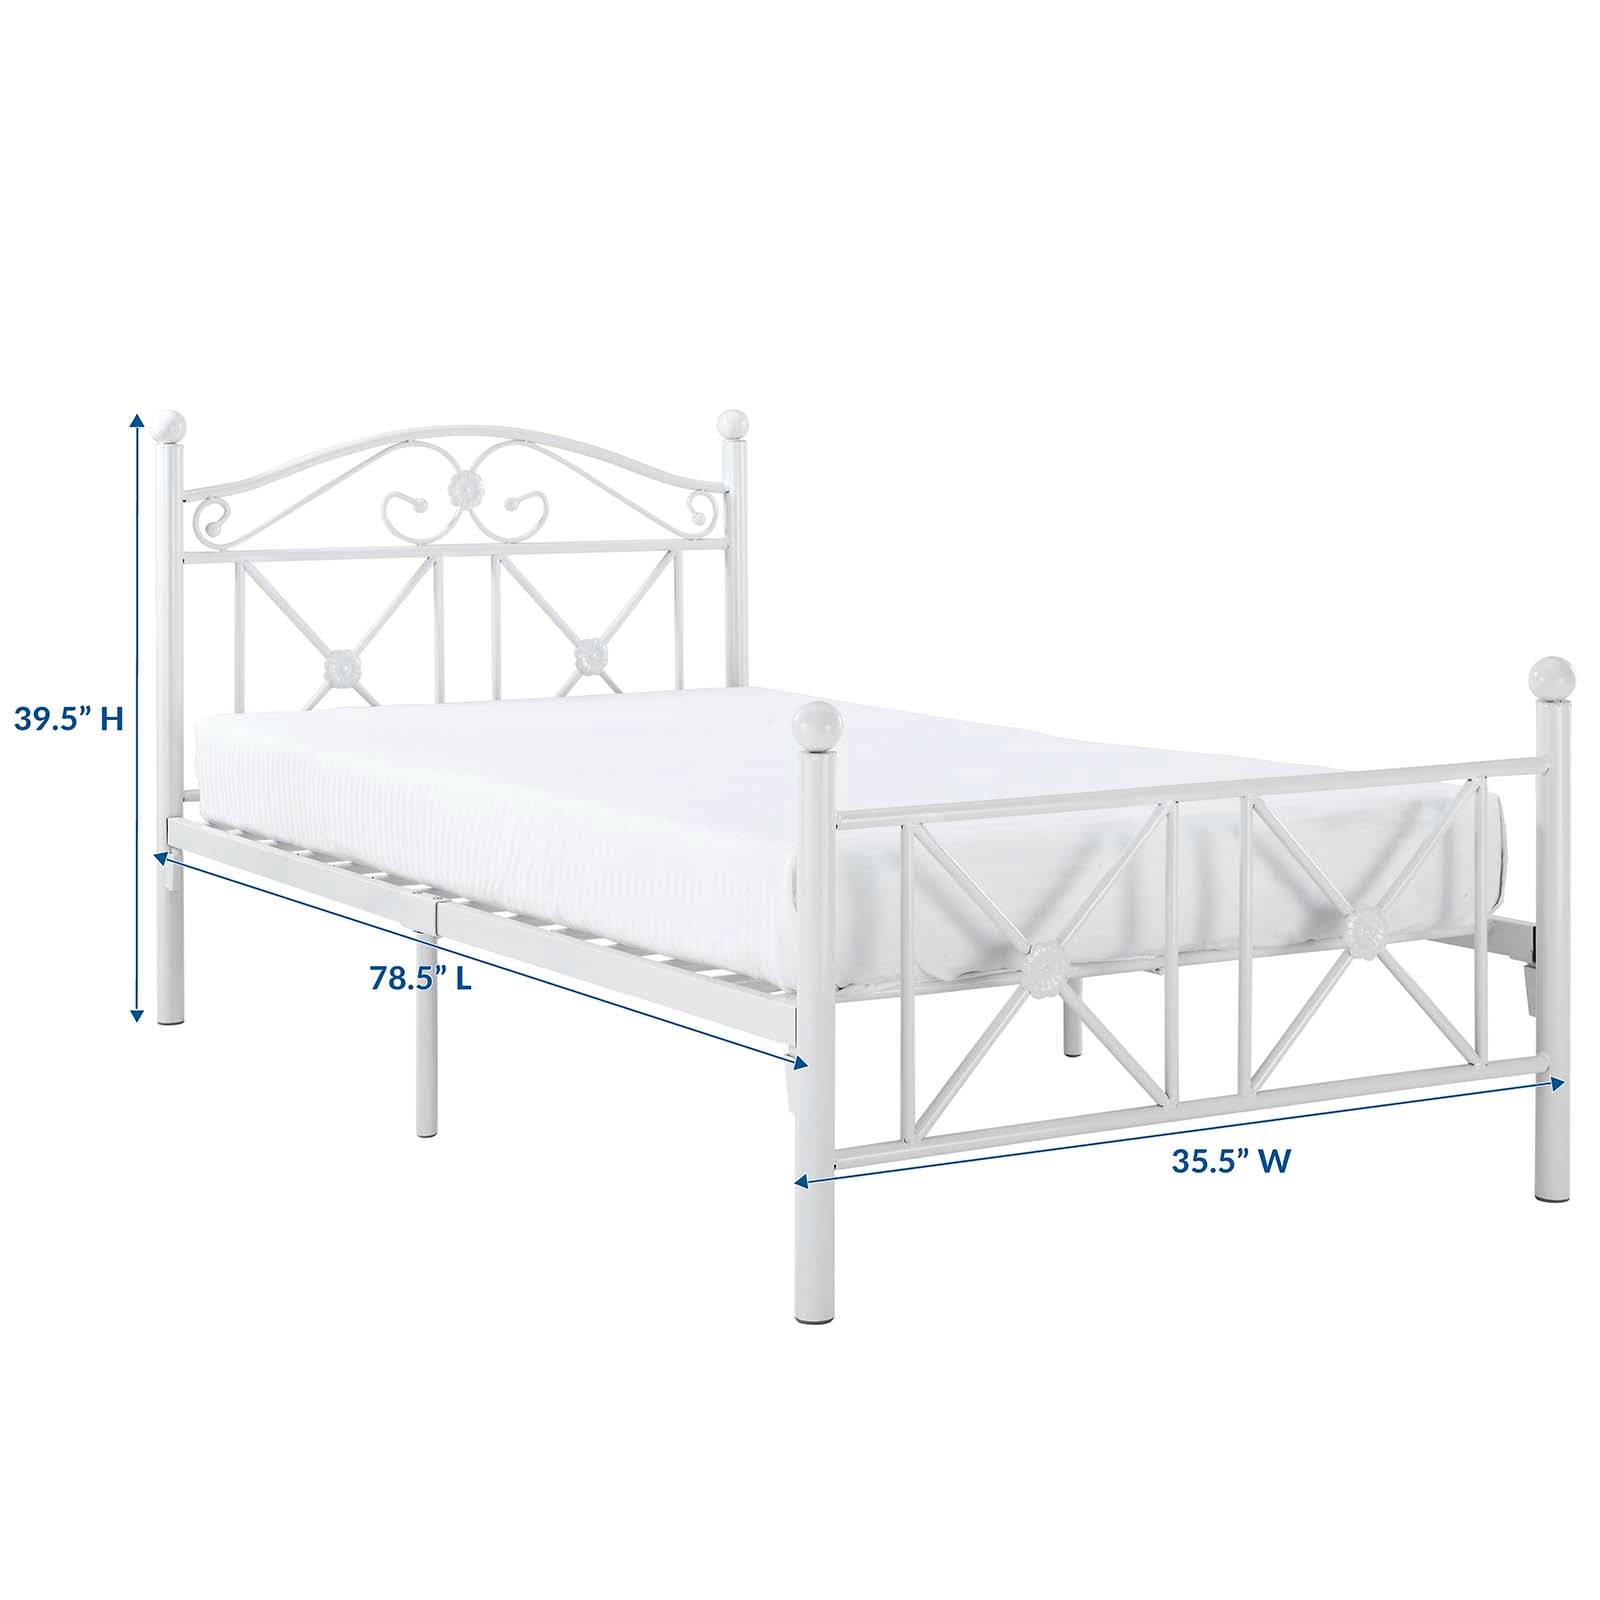 Cottage Twin Bed - East Shore Modern Home Furnishings